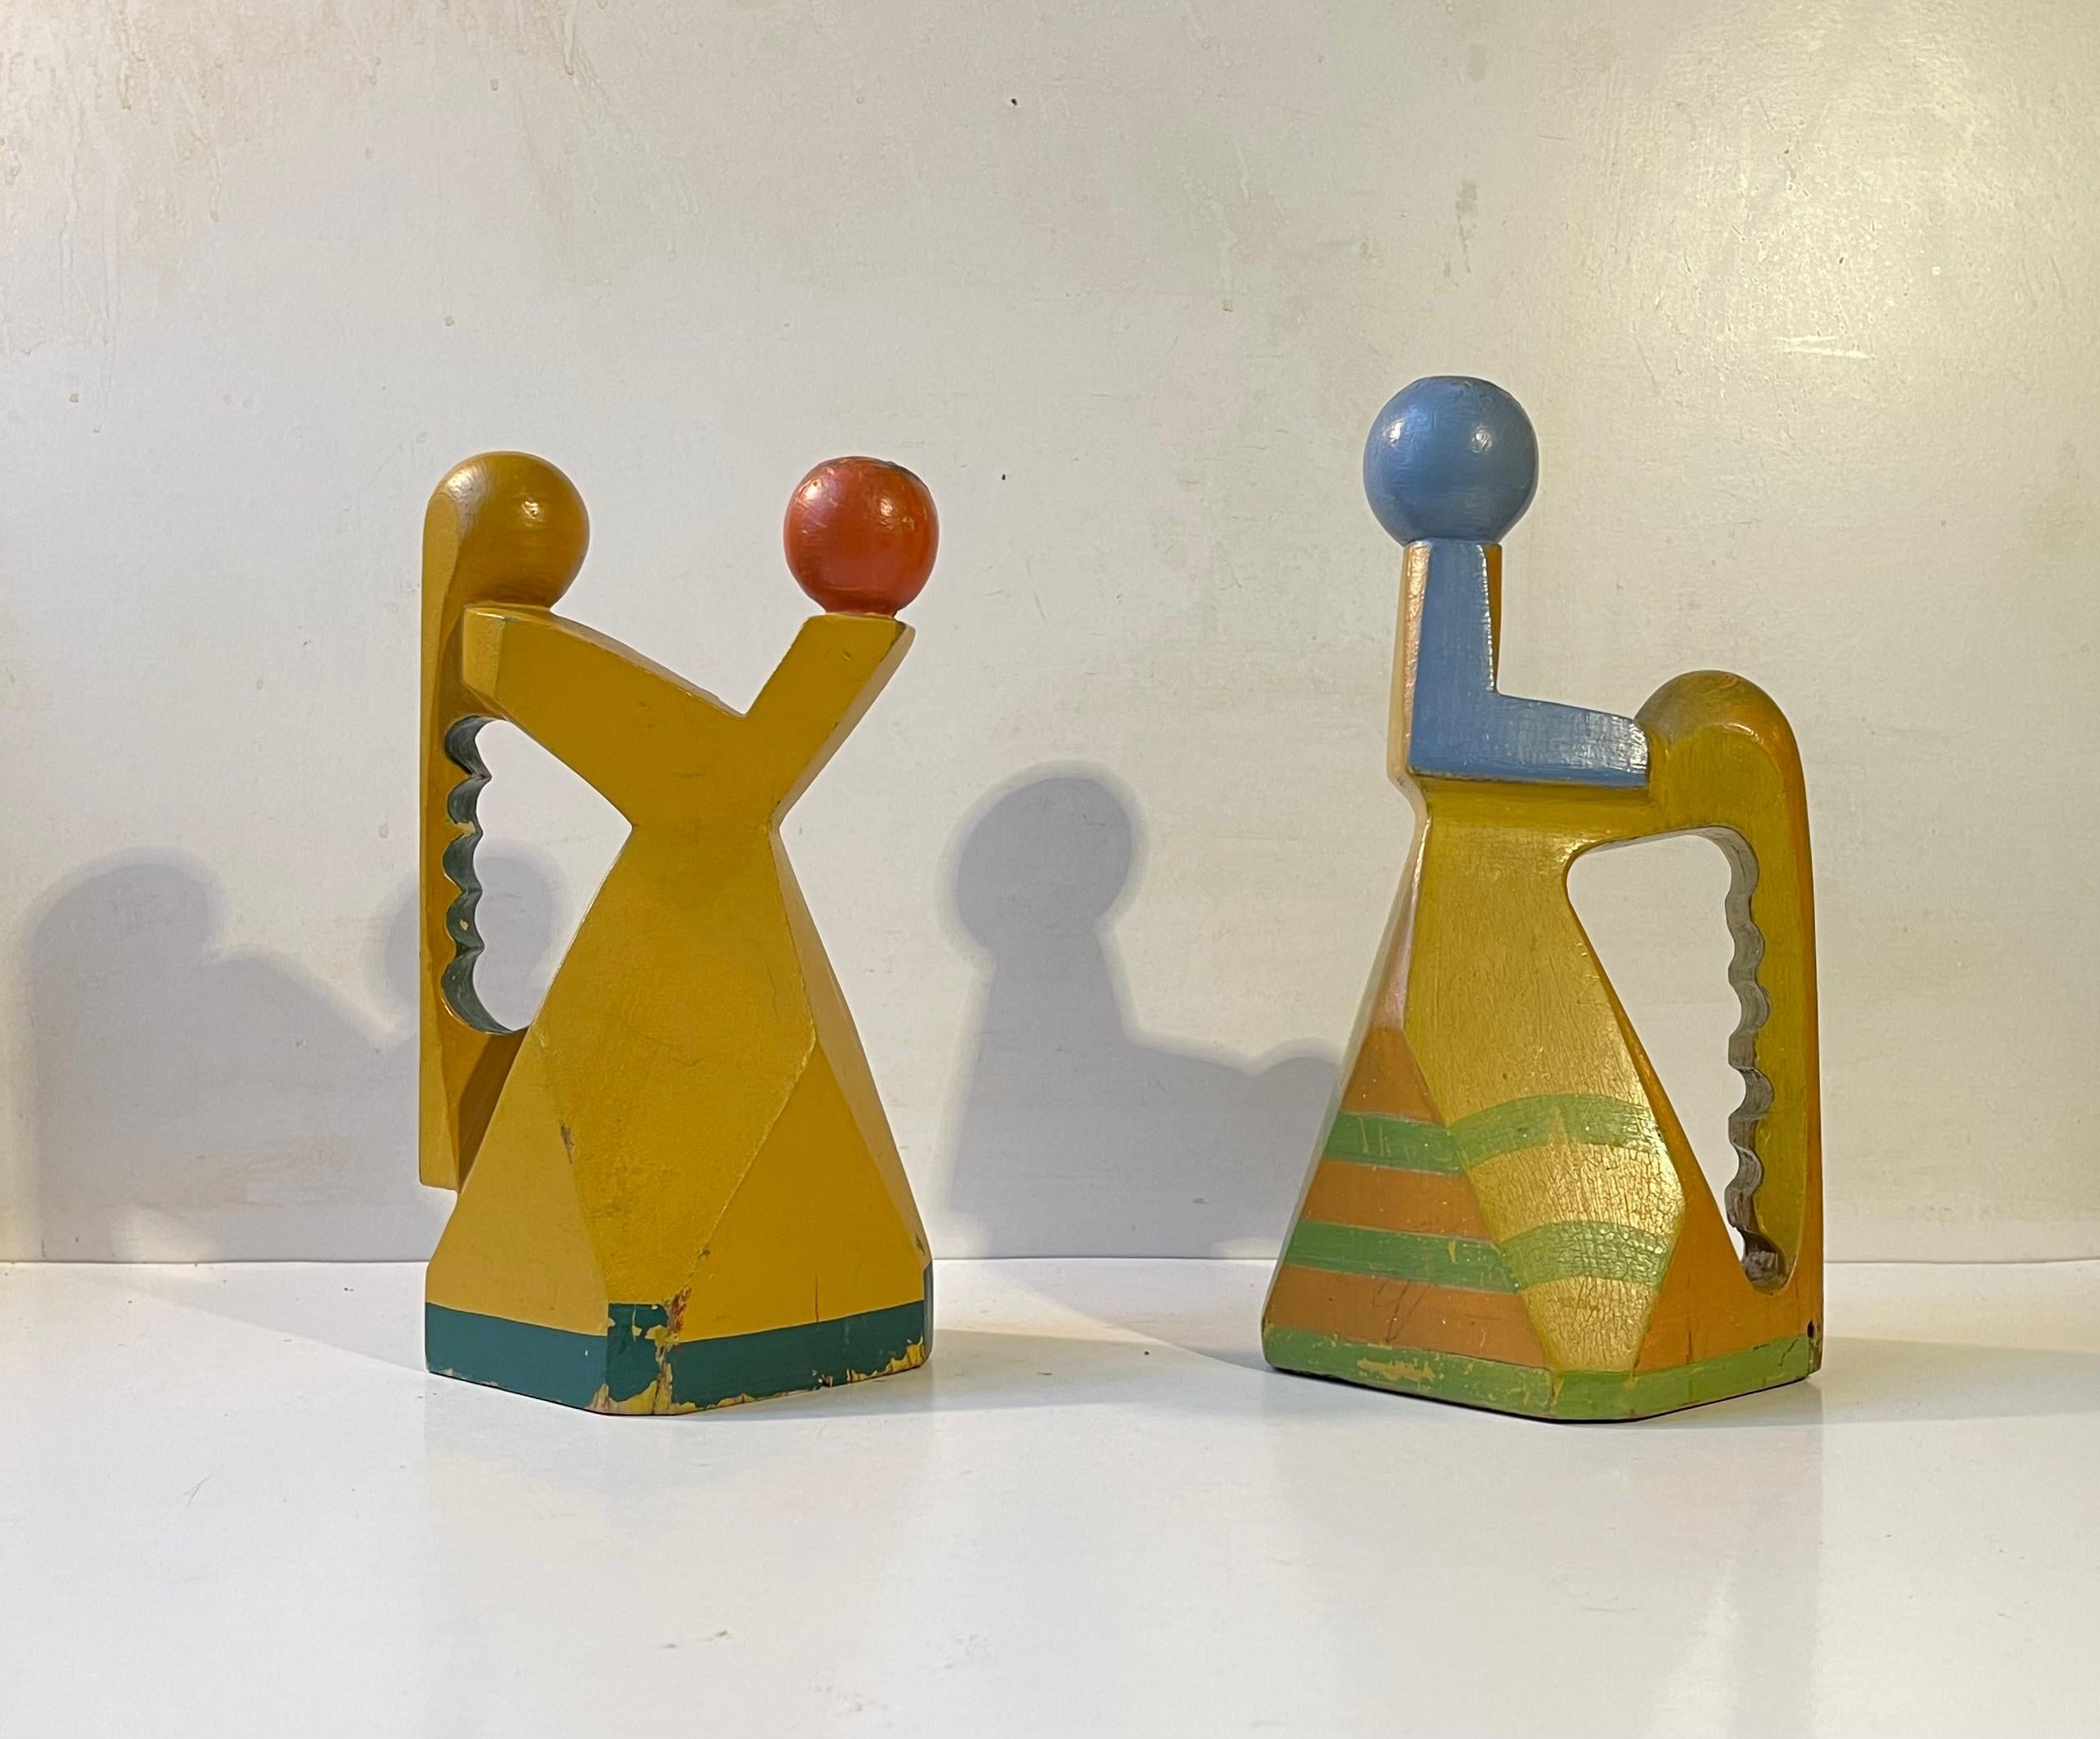 A set of 1950s sculptural surrealist candleholders in hand-painted re-cycled oak beams. Uniquely made by the Danish artist, sculptor, ceramist and poet Aksel Hansen (1896-1968). His style is very reminiscent of Picasso, Alexander Archipenko in